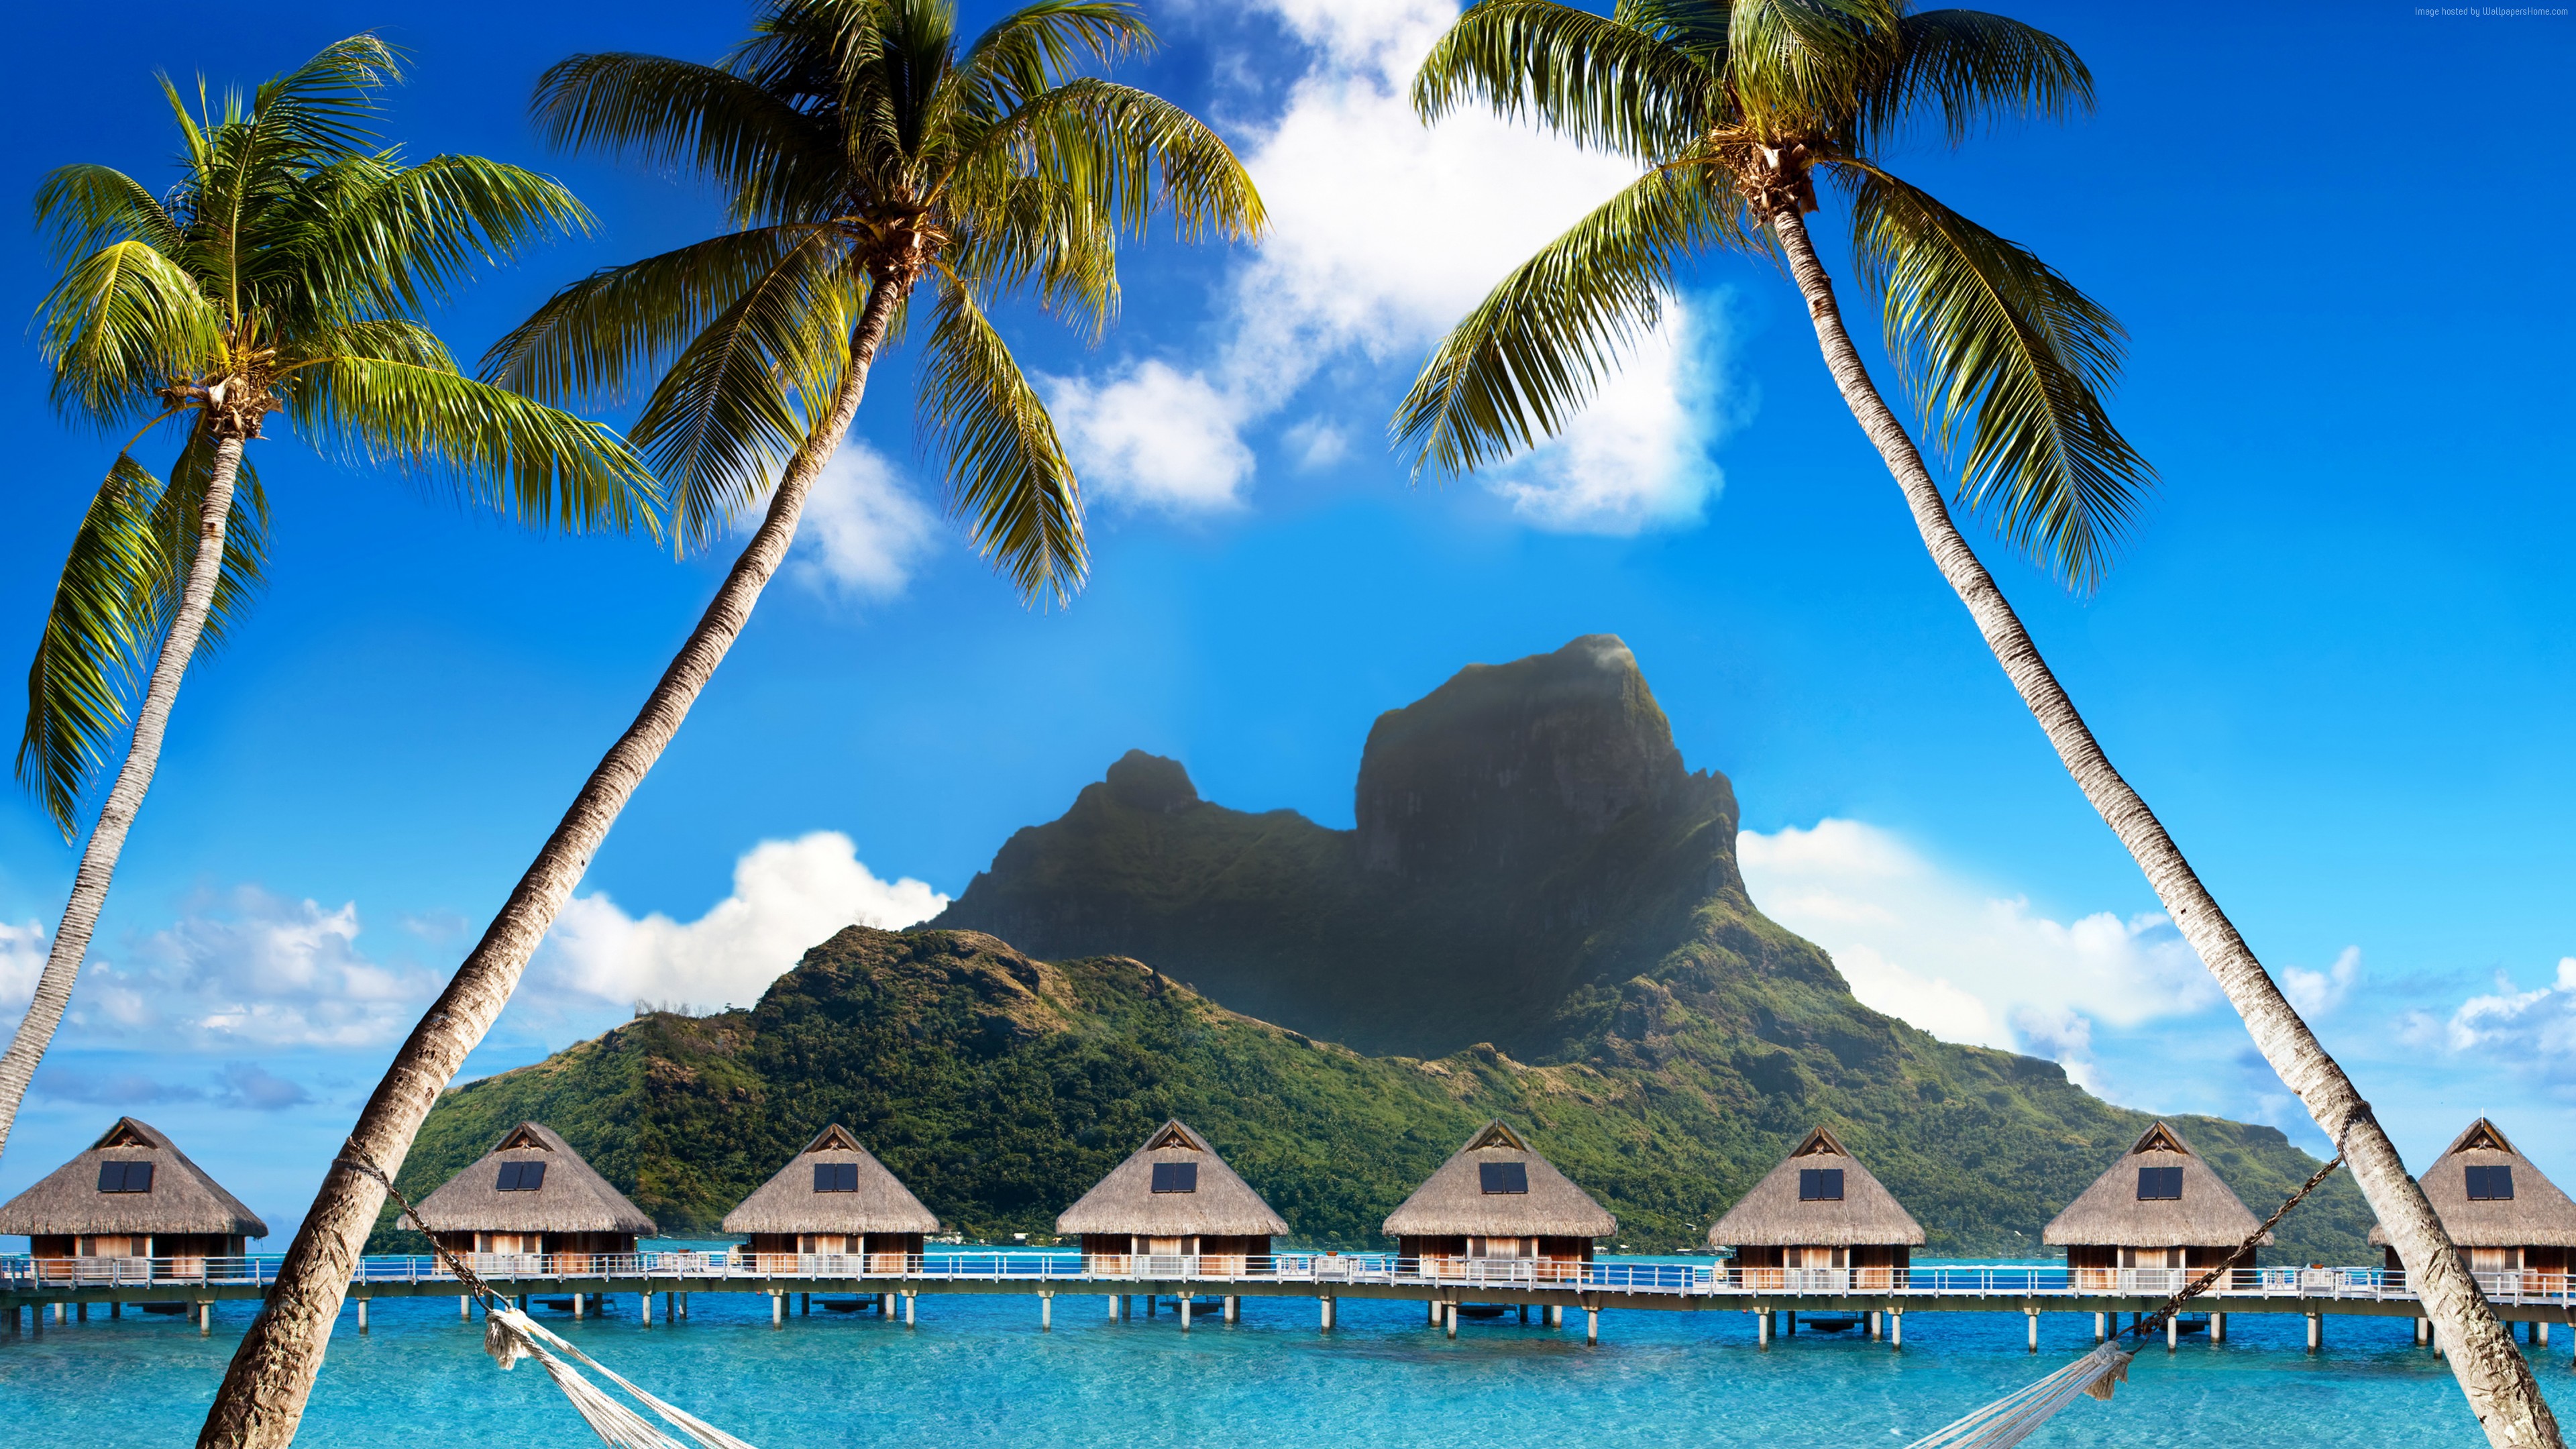 Wallpaper Bora Bora, 5k, 4k wallpaper, French Polynesia, Best beaches of 2017, Best Hotels of 2017, ocean, palm trees, mountains, beach, vacation, rest, travel, booking, palm trees, hammock, Travel